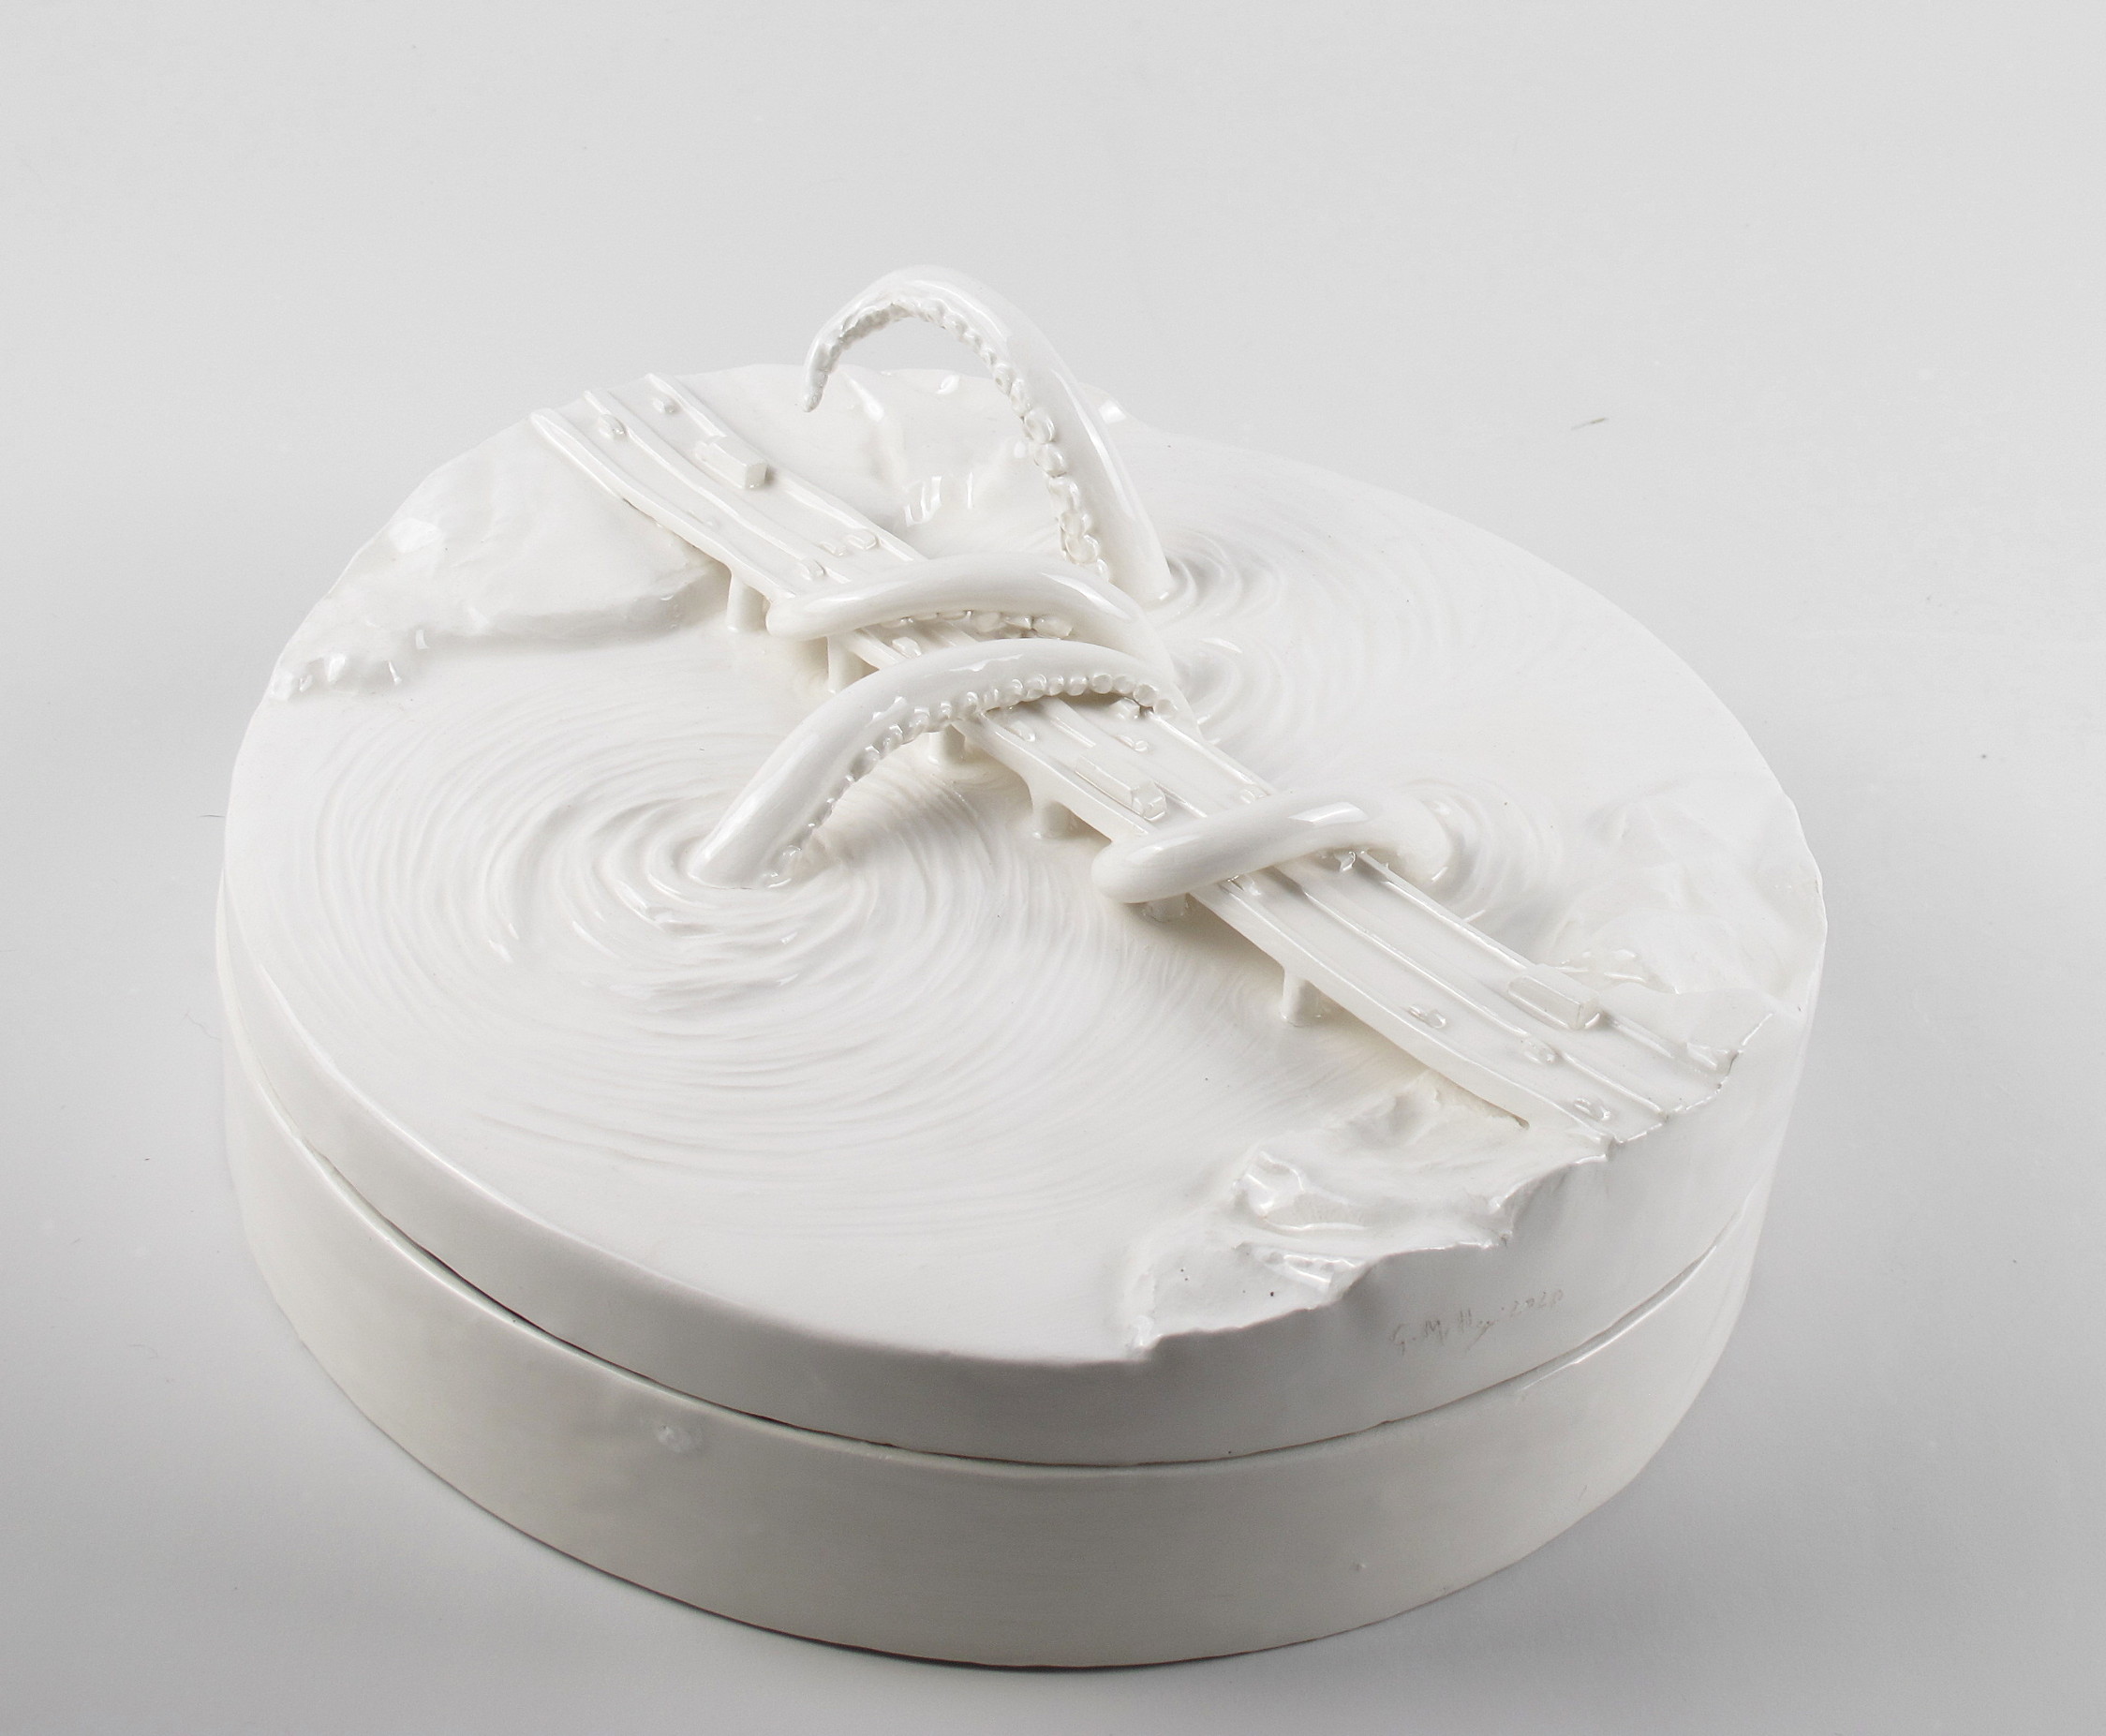 there's something in the water Gabriele Mallegni 2020 white glazed ceramic